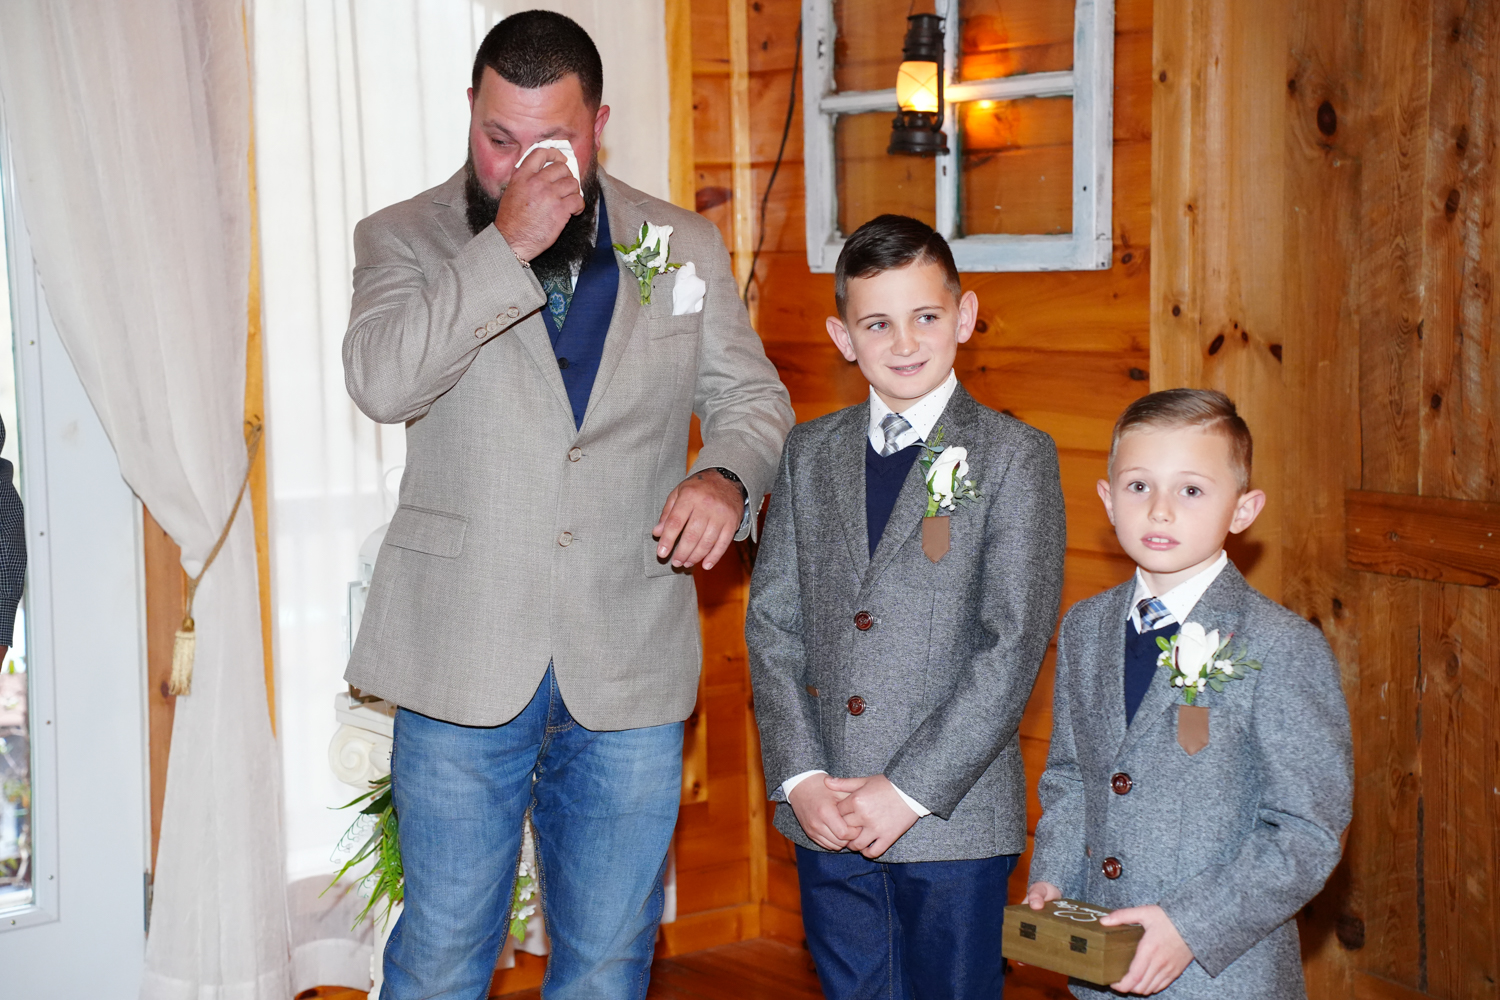 Groom wiping a tear from his eye in a wedding chapel standing next to his smiling sons